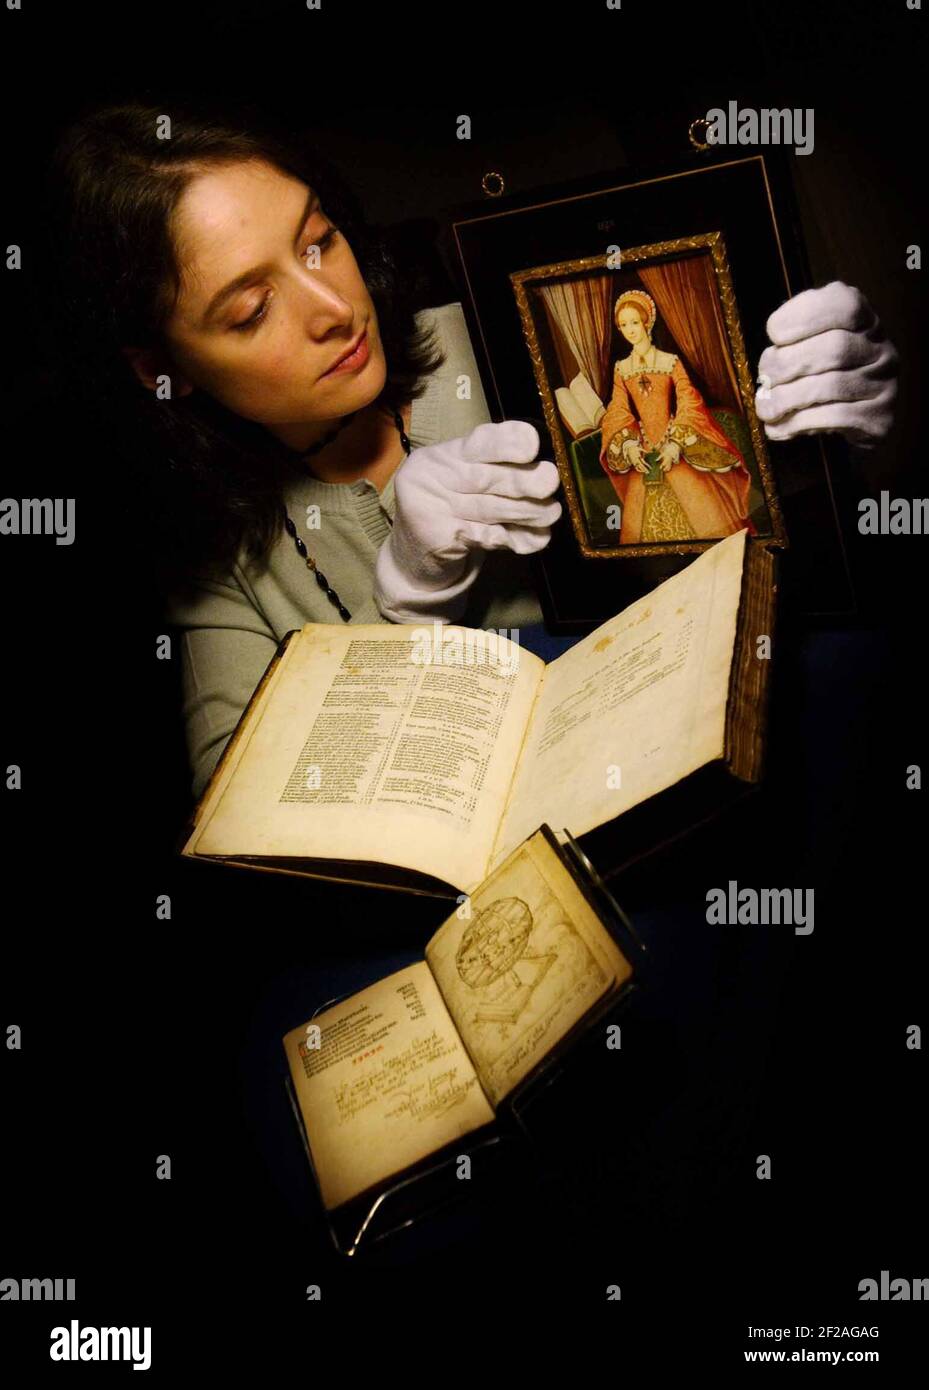 SUSAN OWEN,CURATOR AT THE ROYAL COLLECTION IN WINDSOR CASTLE PICTURED WITH A PORTRAIT OF ELIZABETH 1 AND BOOKS CONTAINING HER SIGNATURE AND POEMS, TO GO ON DISDLAY IN THE DRAWINGS GALLERY ATB THE CASTLE,TO MARK THE 400TH ANNIVERARY OF THE QUEENS DEATH. 4/2/03 PILSTON. Stock Photo